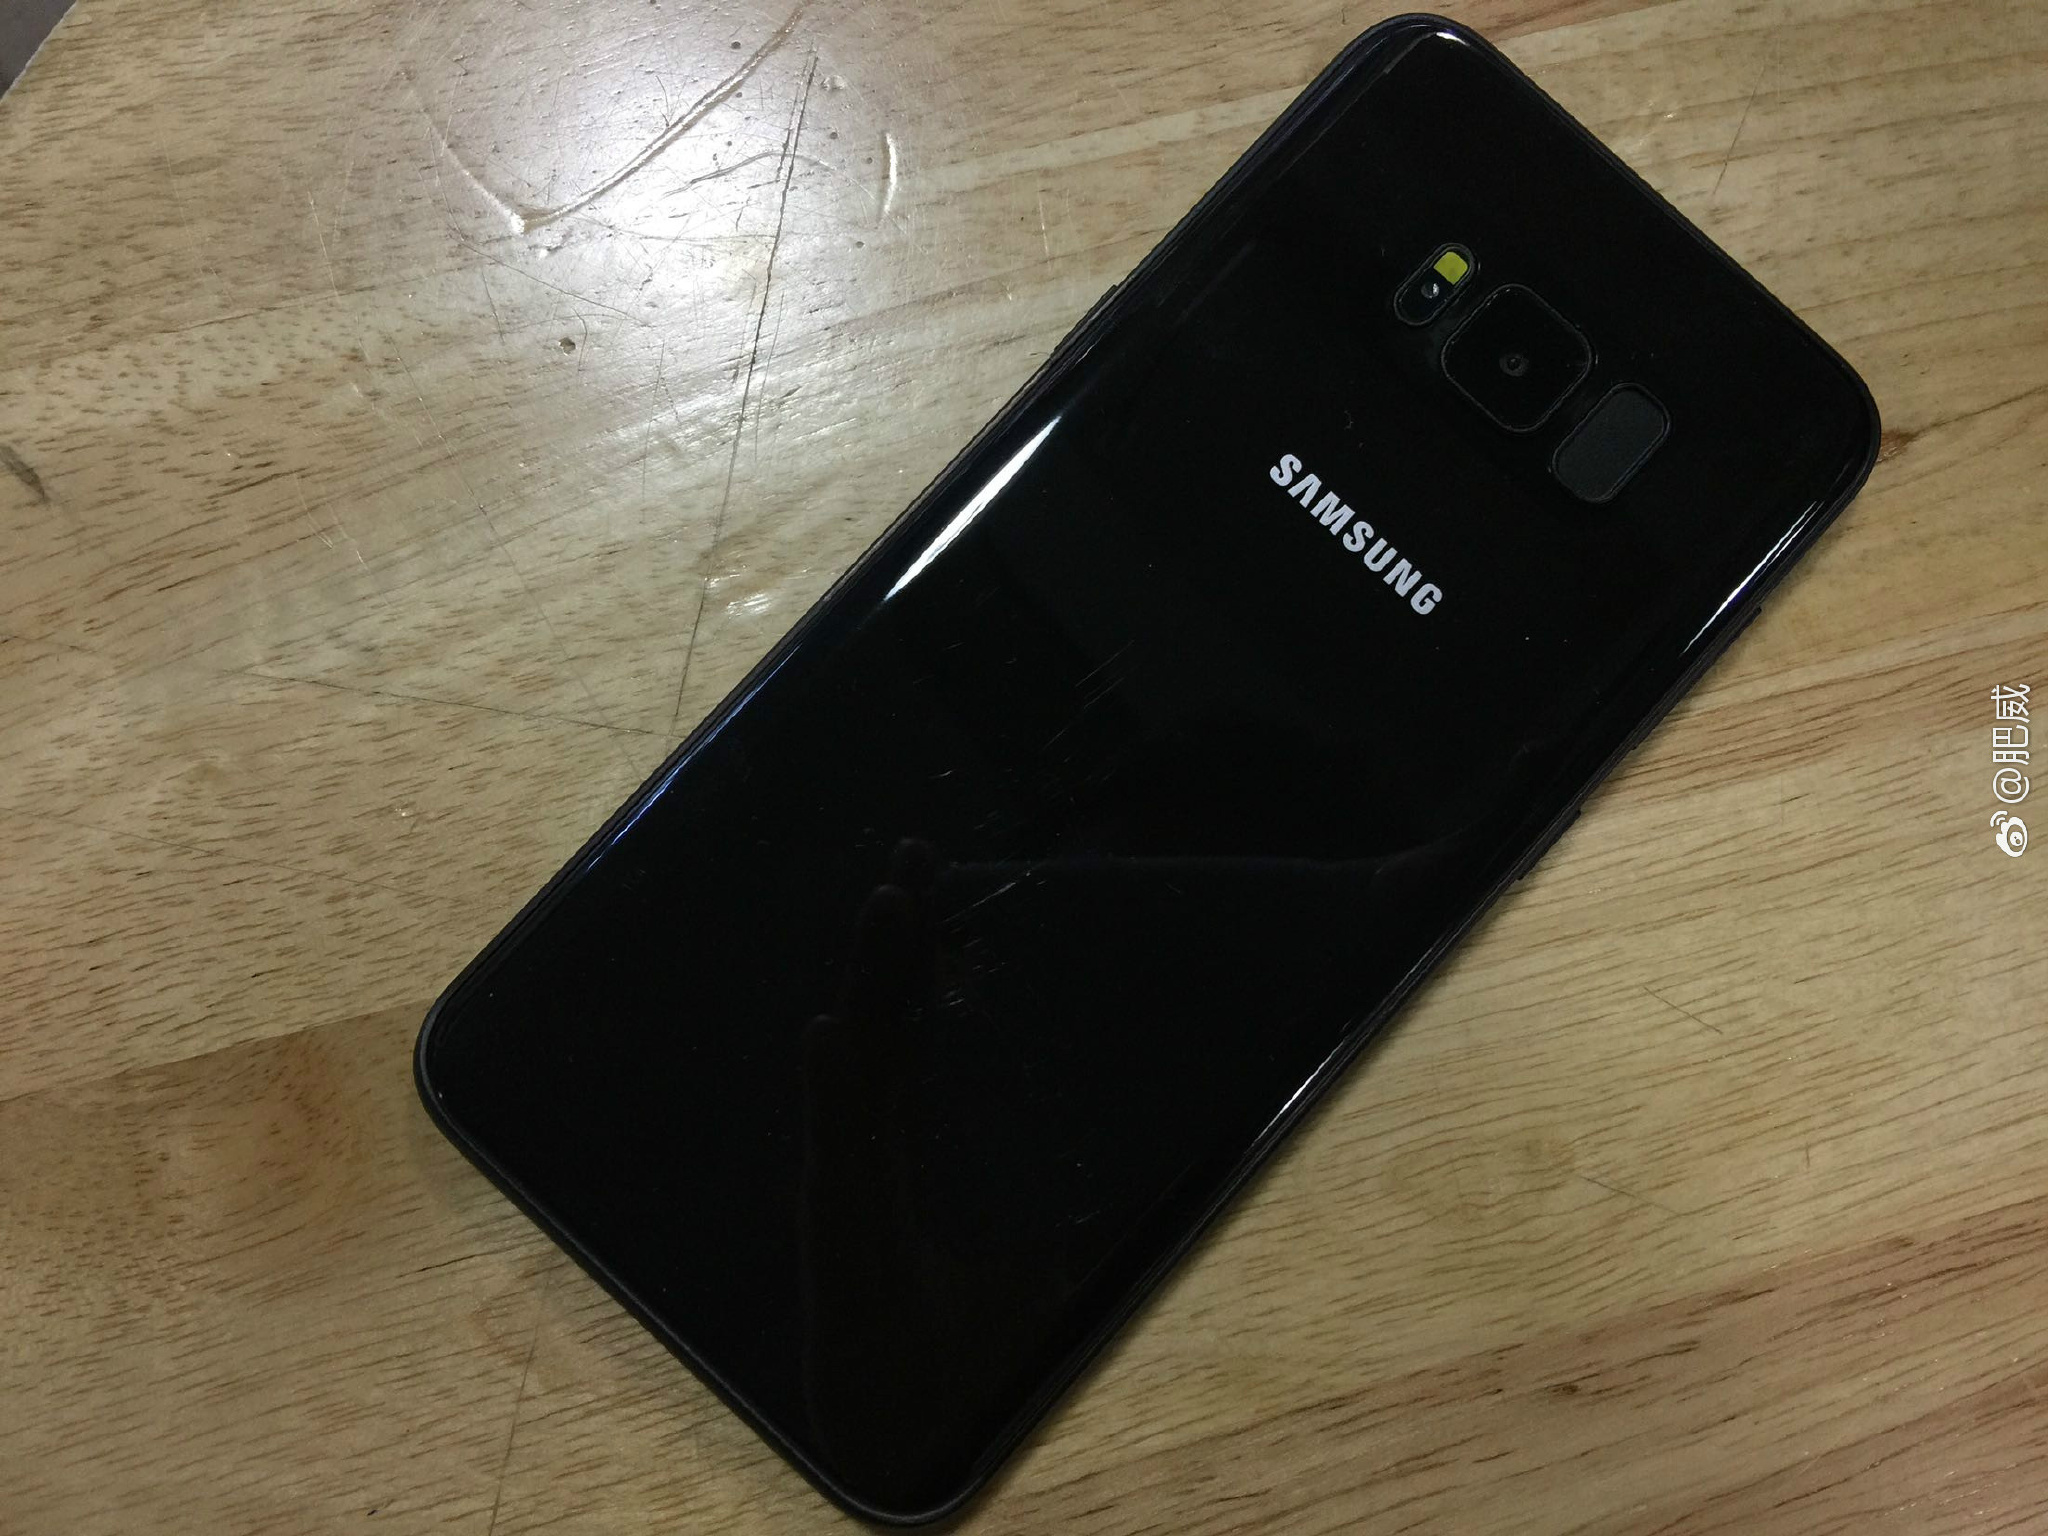 Black color Galaxy S8 leaks in new pics 5